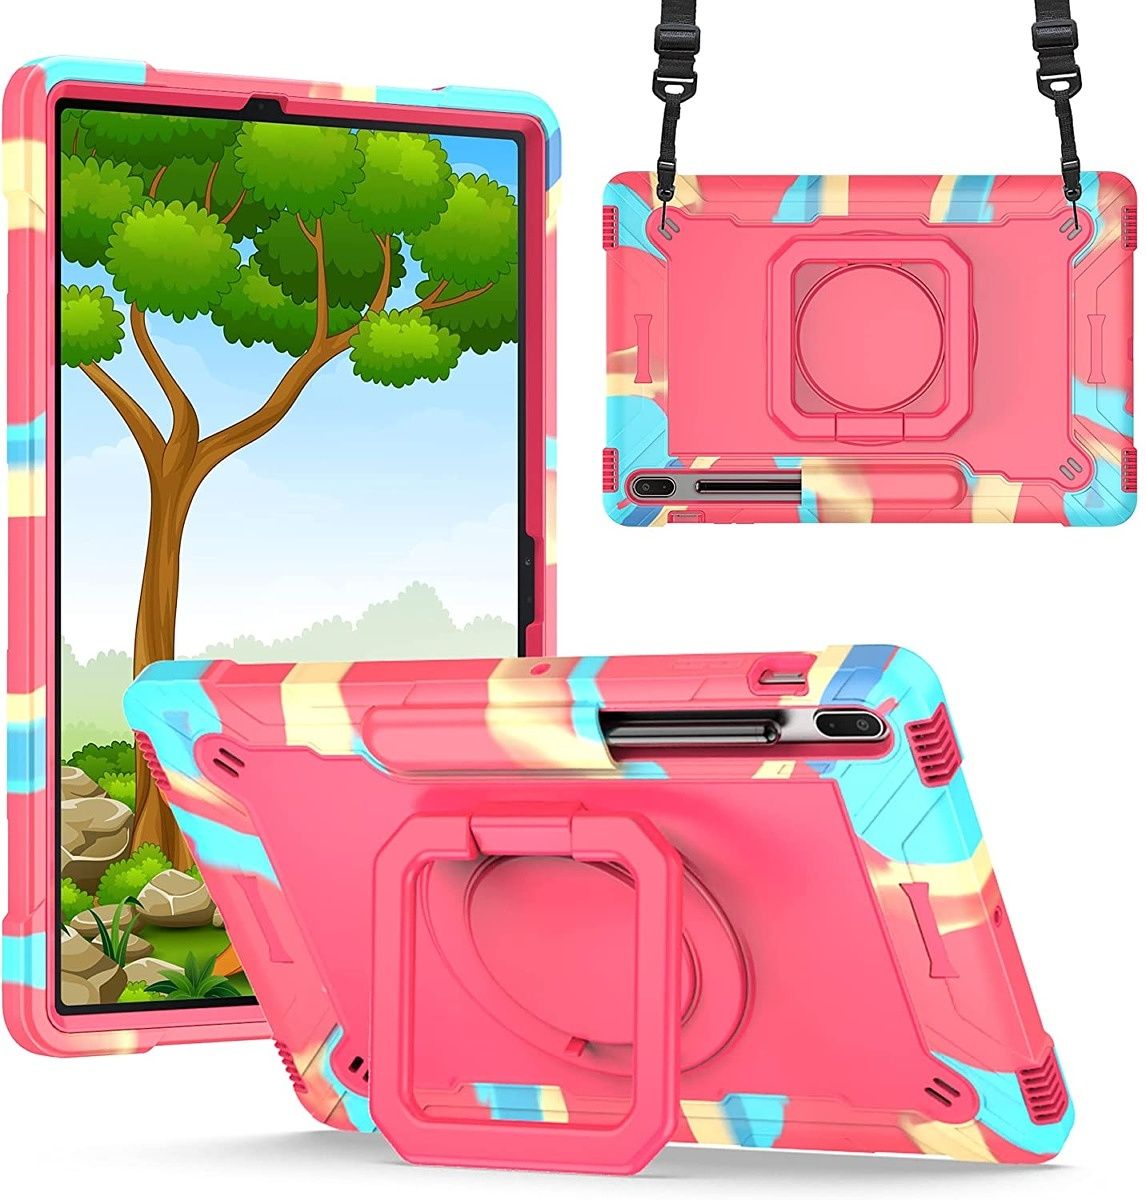 This shockproof case is aimed at children. It's available in 19 different colors for your kid to choose from and includes a shoulder strap for hassle-free mobility.